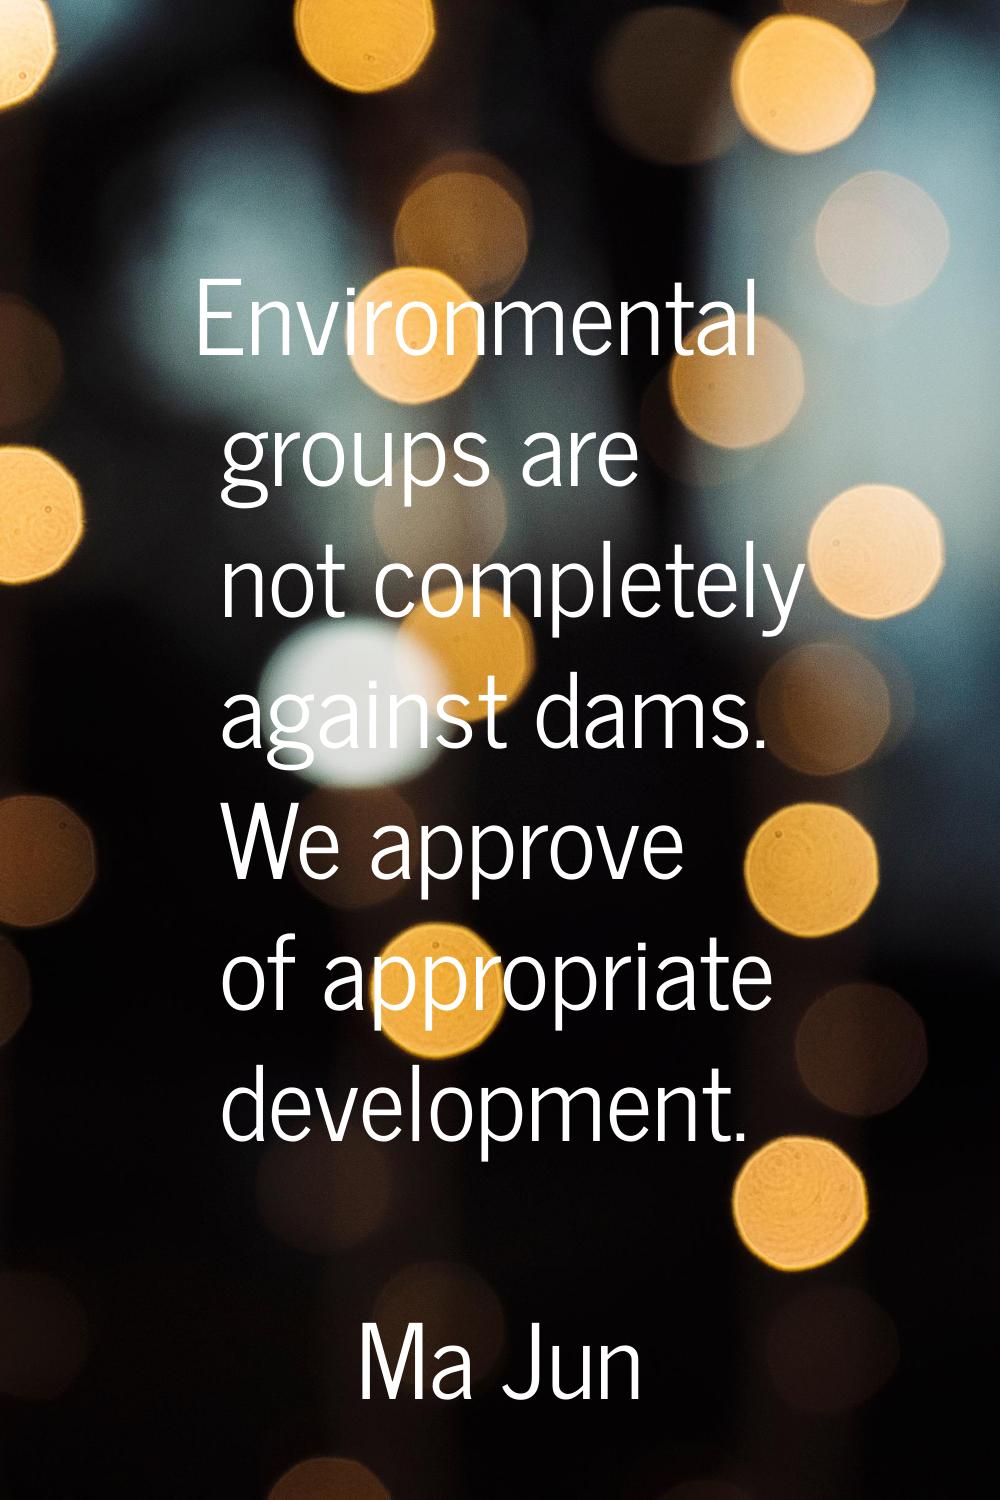 Environmental groups are not completely against dams. We approve of appropriate development.